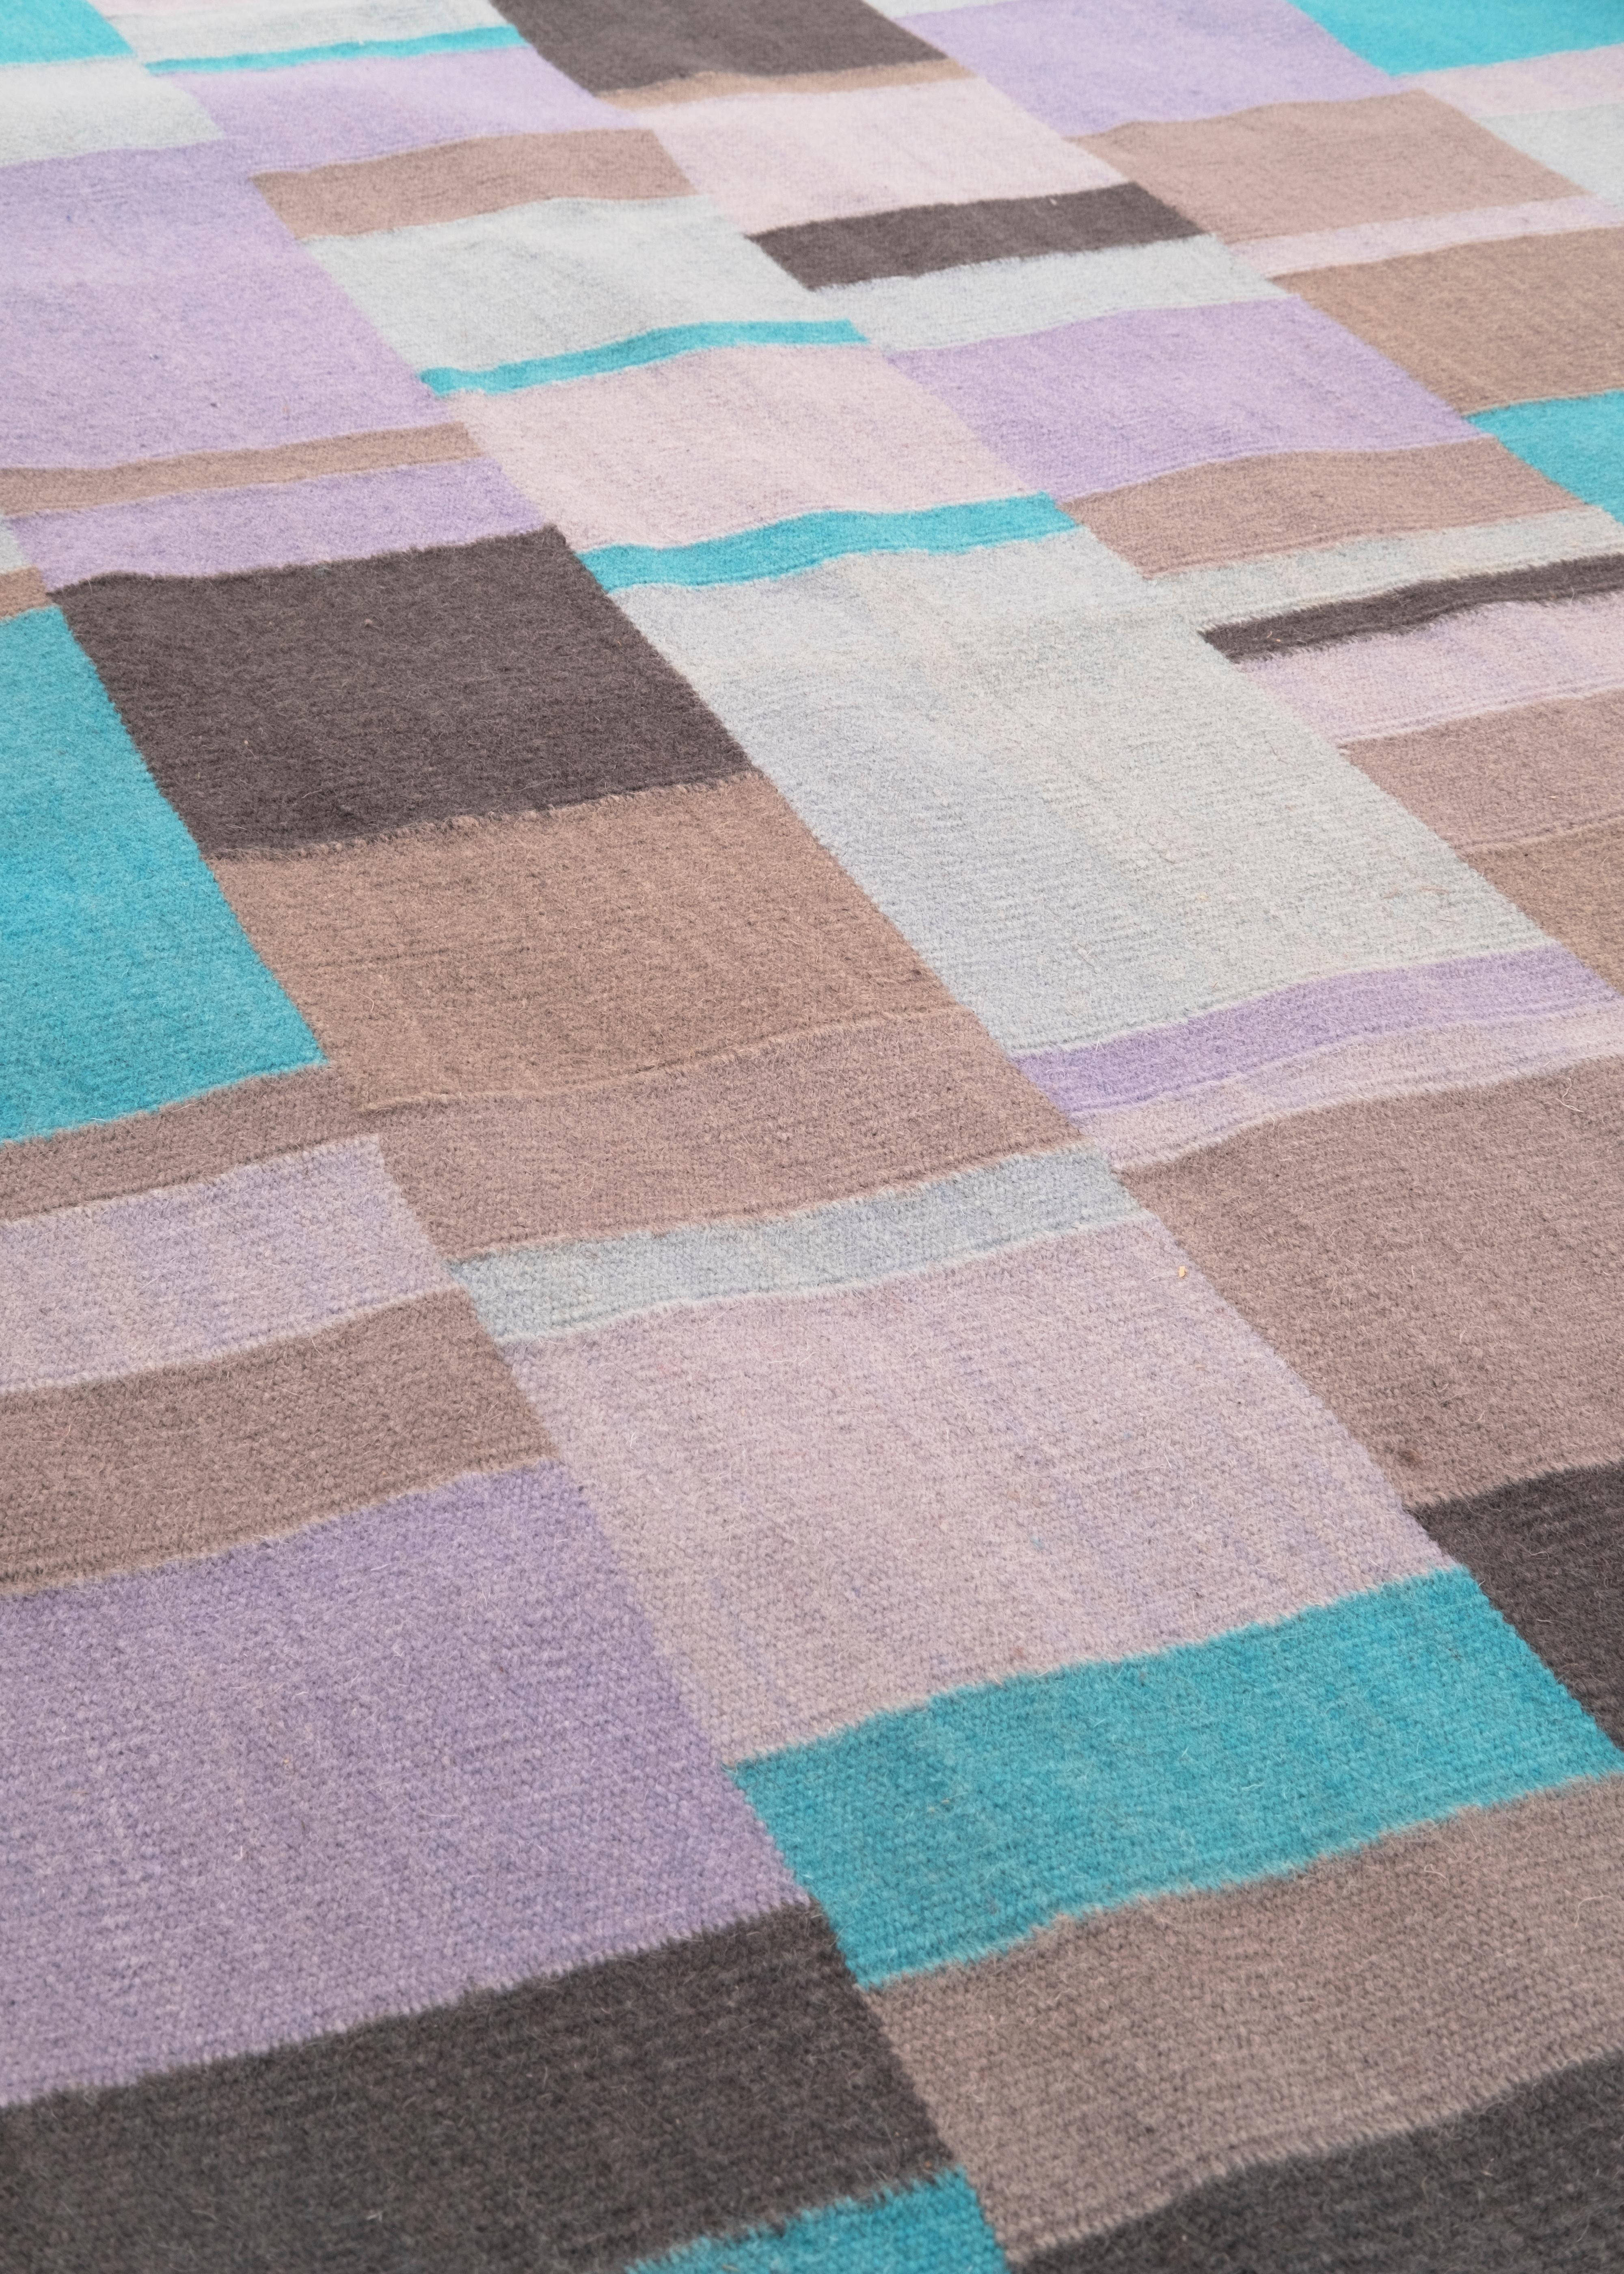 Tempo Sette - Blue

This Kilim Rug is lightweight and breathable.
Available in stock, has been used once for a magazine photo shooting.

Woollen weave with geometrical motifs in a sophisticated colour combinations. The lightness of a traditional